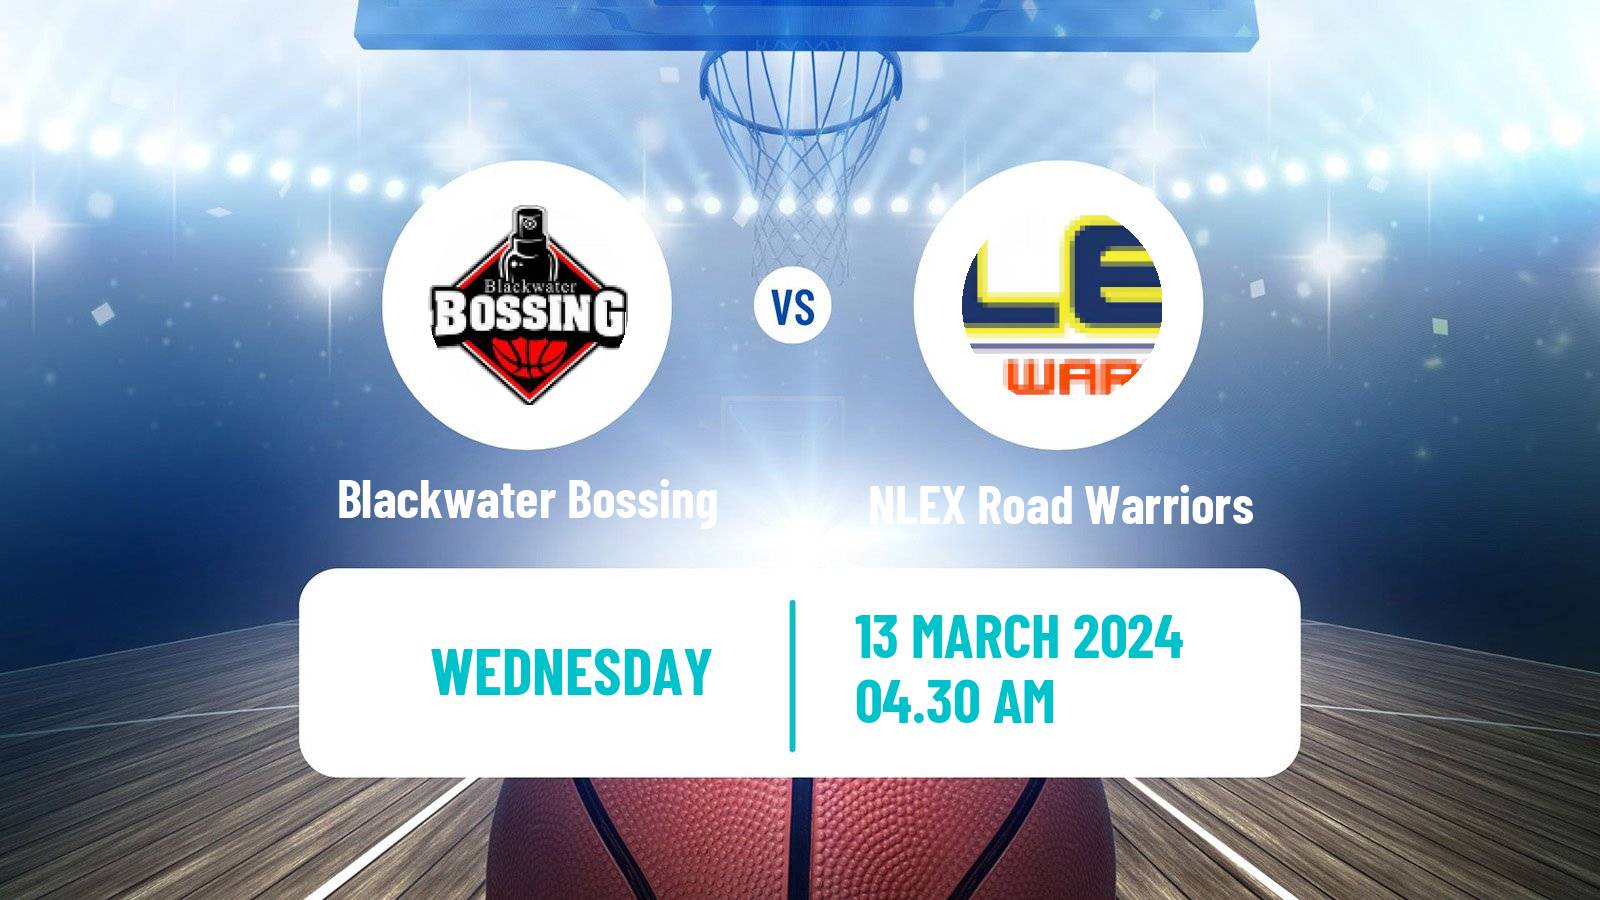 Basketball Philippines Cup Blackwater Bossing - NLEX Road Warriors